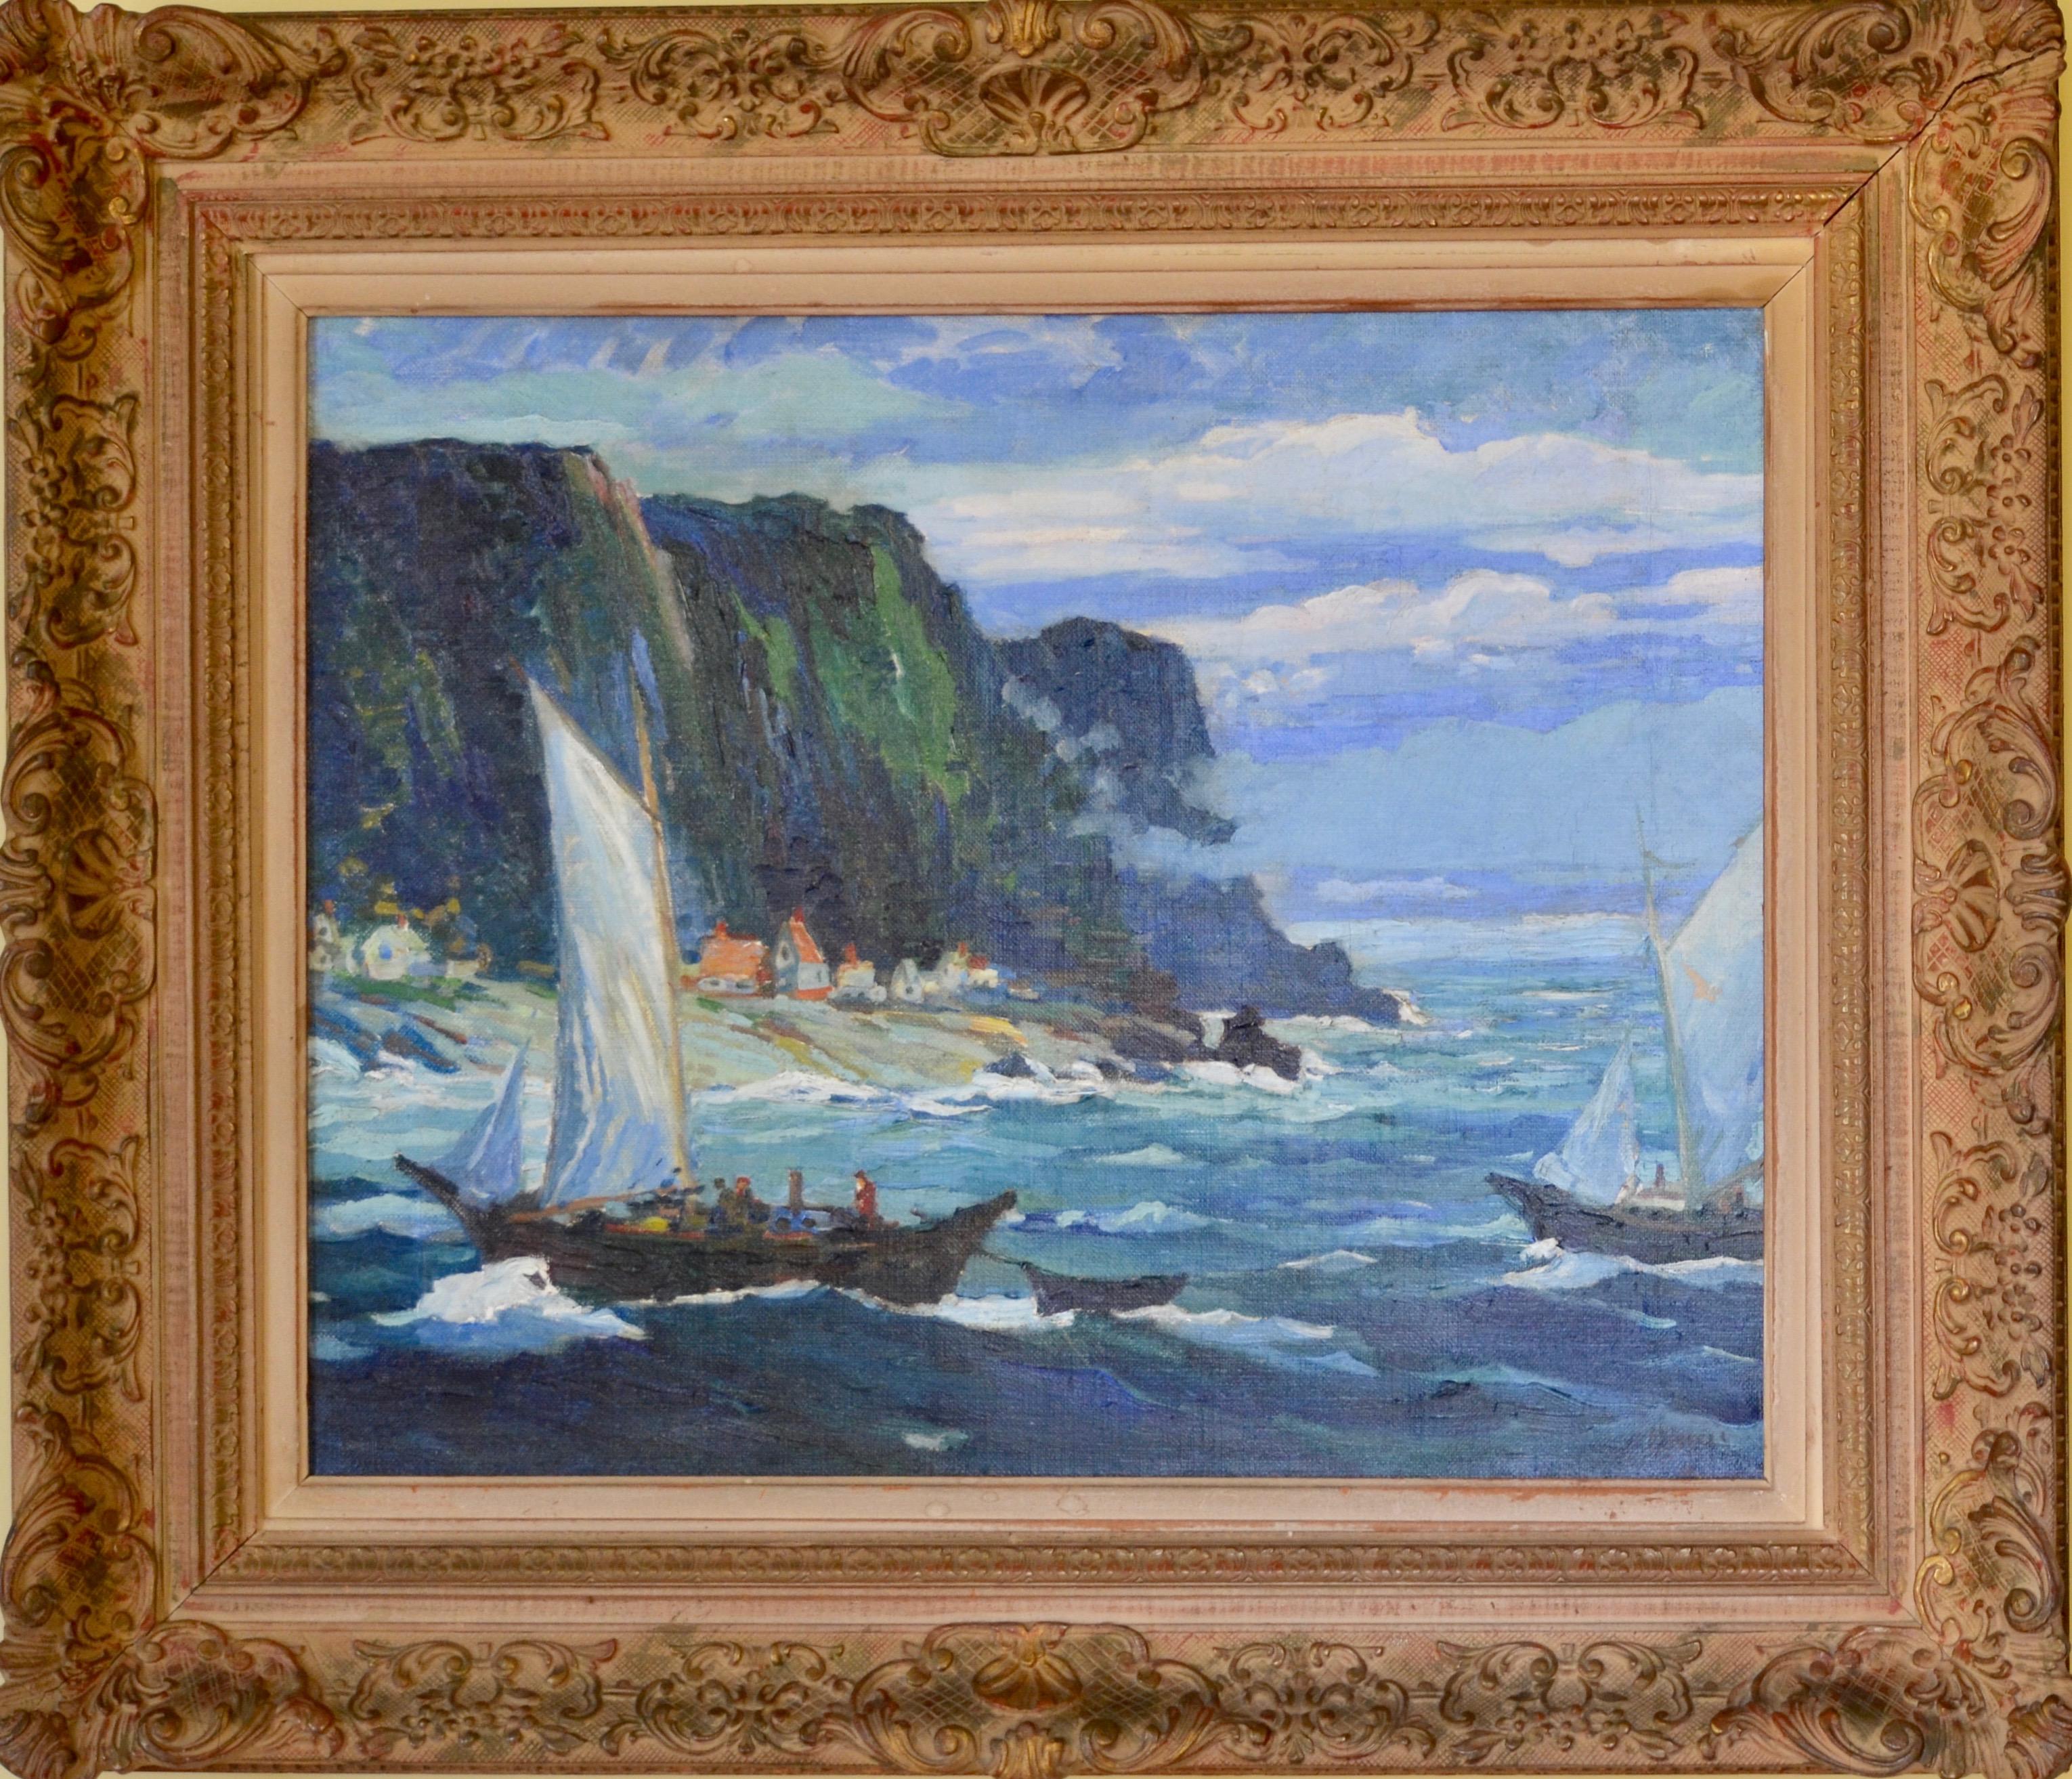 Sailboats Fishing off the Eastport Maine Coast - Fishermen - Sailing Sail Boat  - Painting by George Pearse Ennis